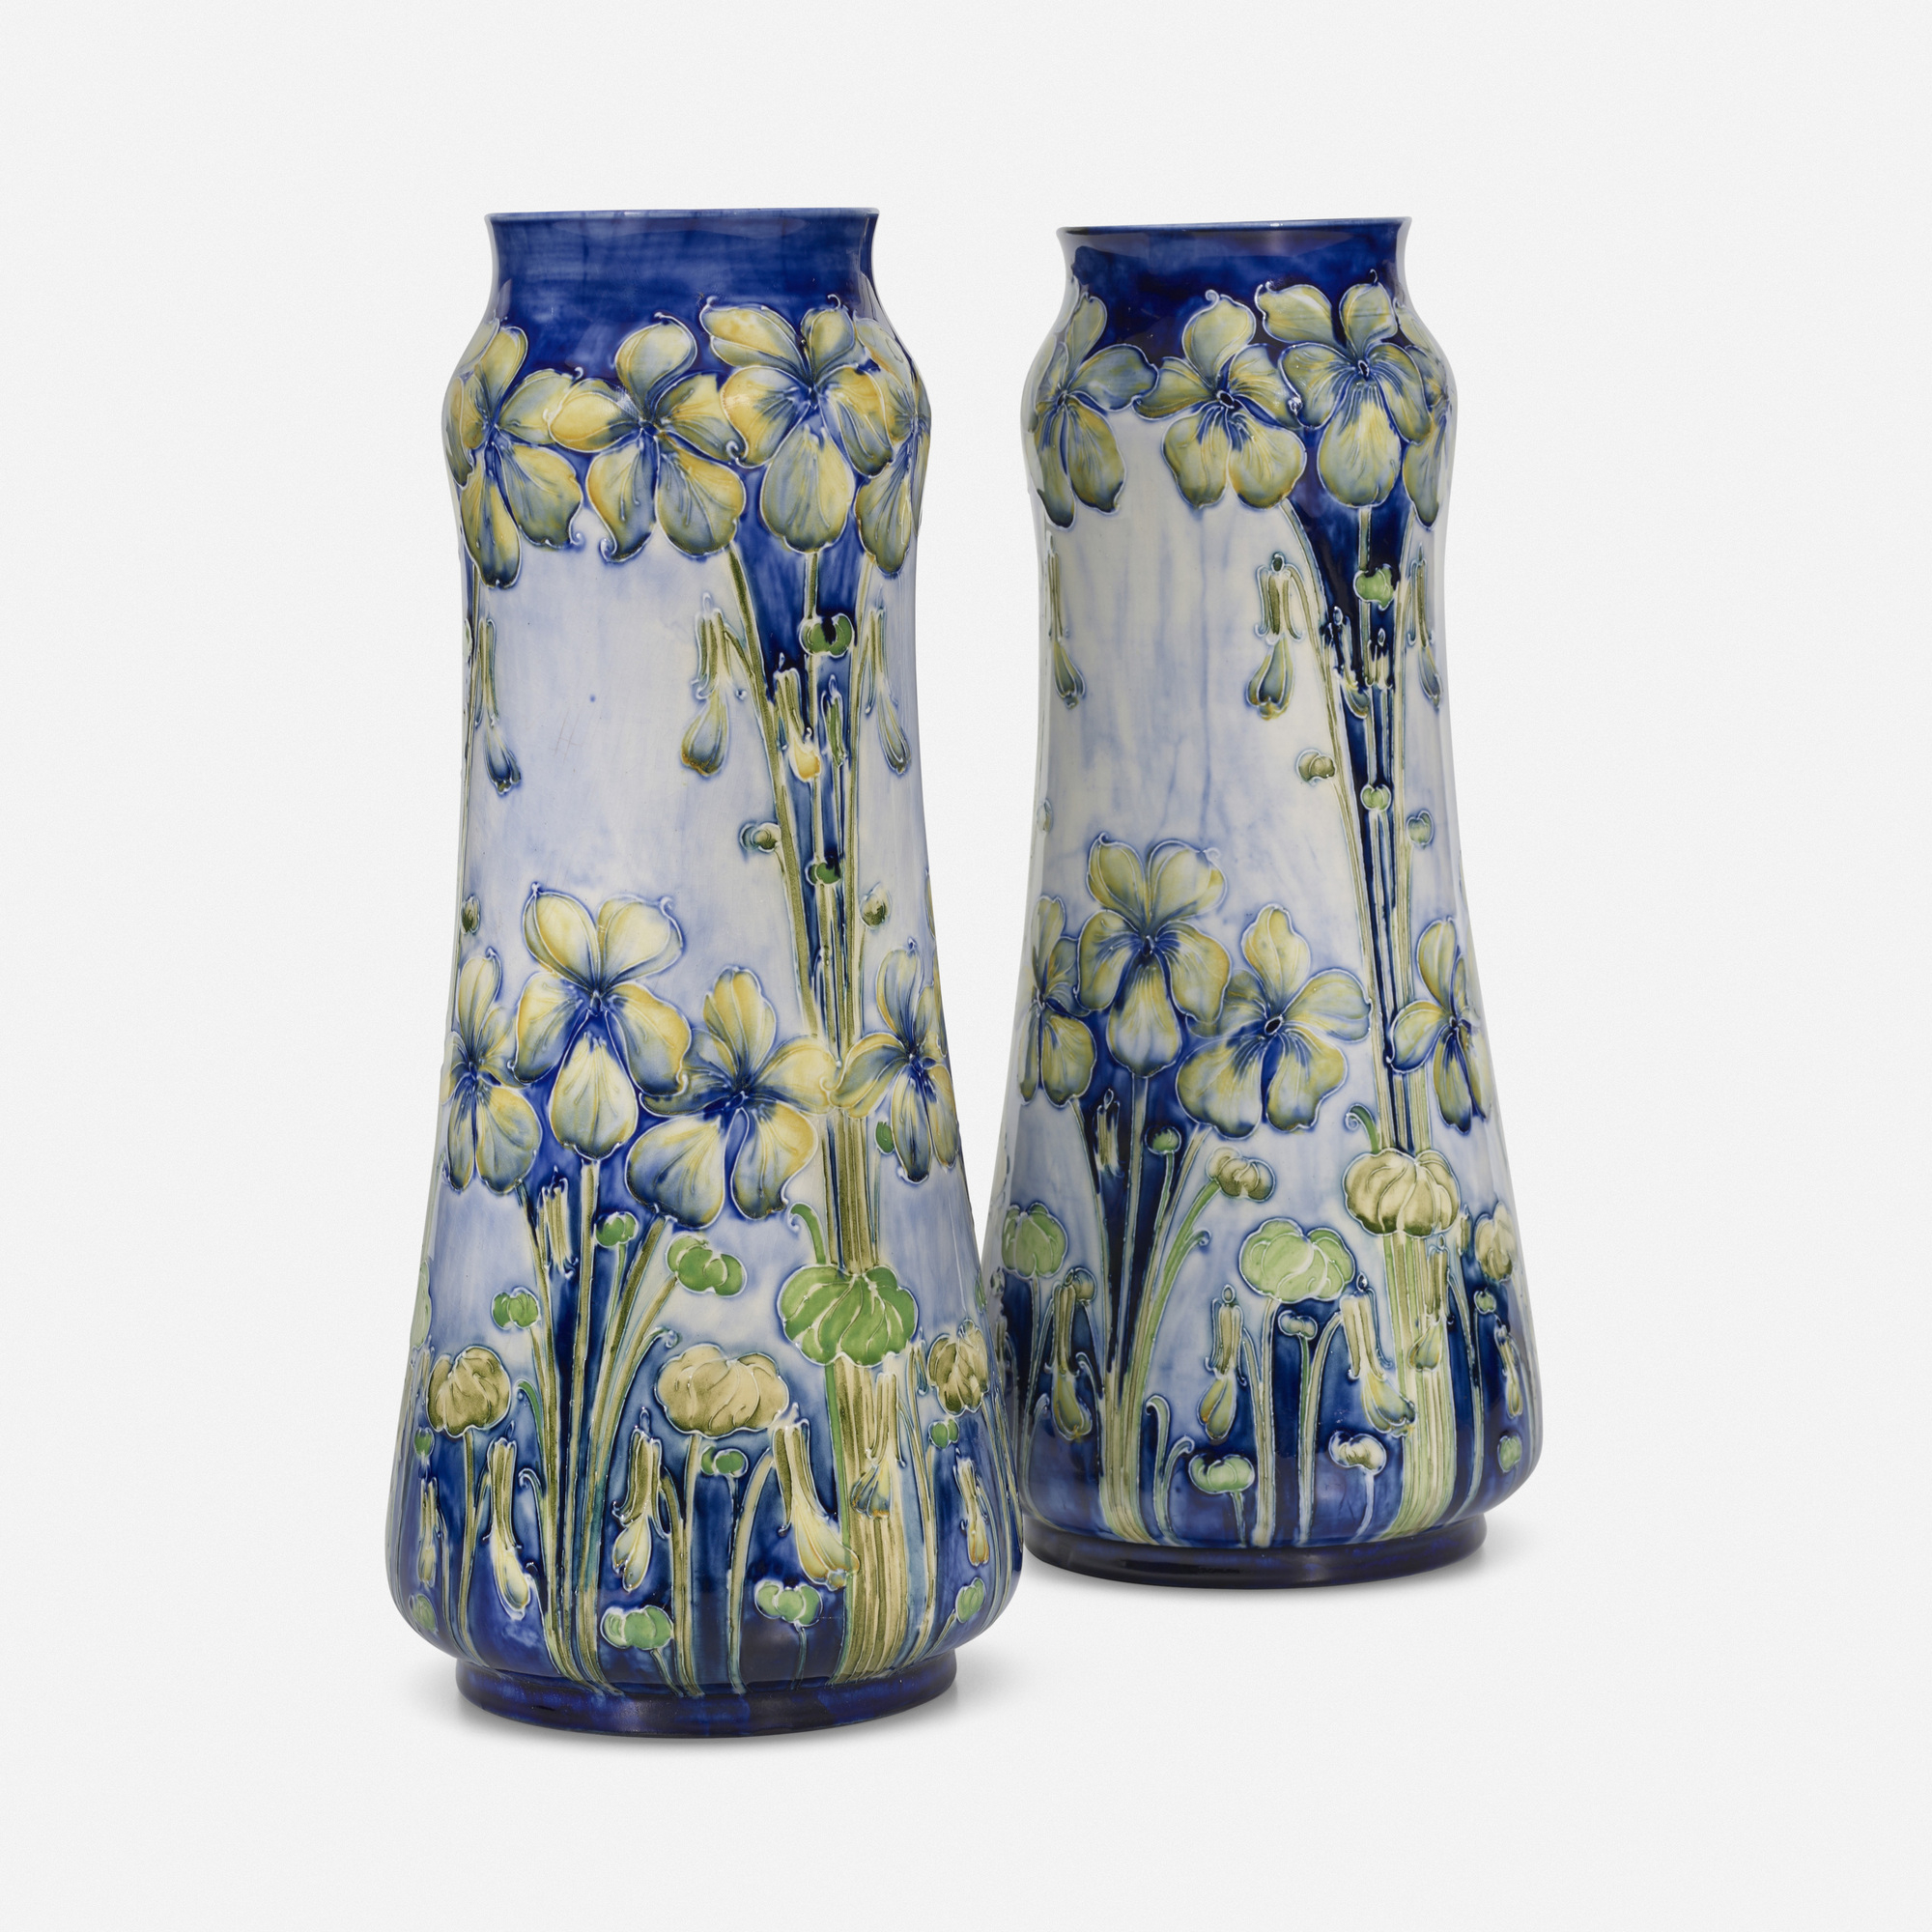 William Moorcroft for James Macintyre & Co., Florian Ware vases with violets, pair